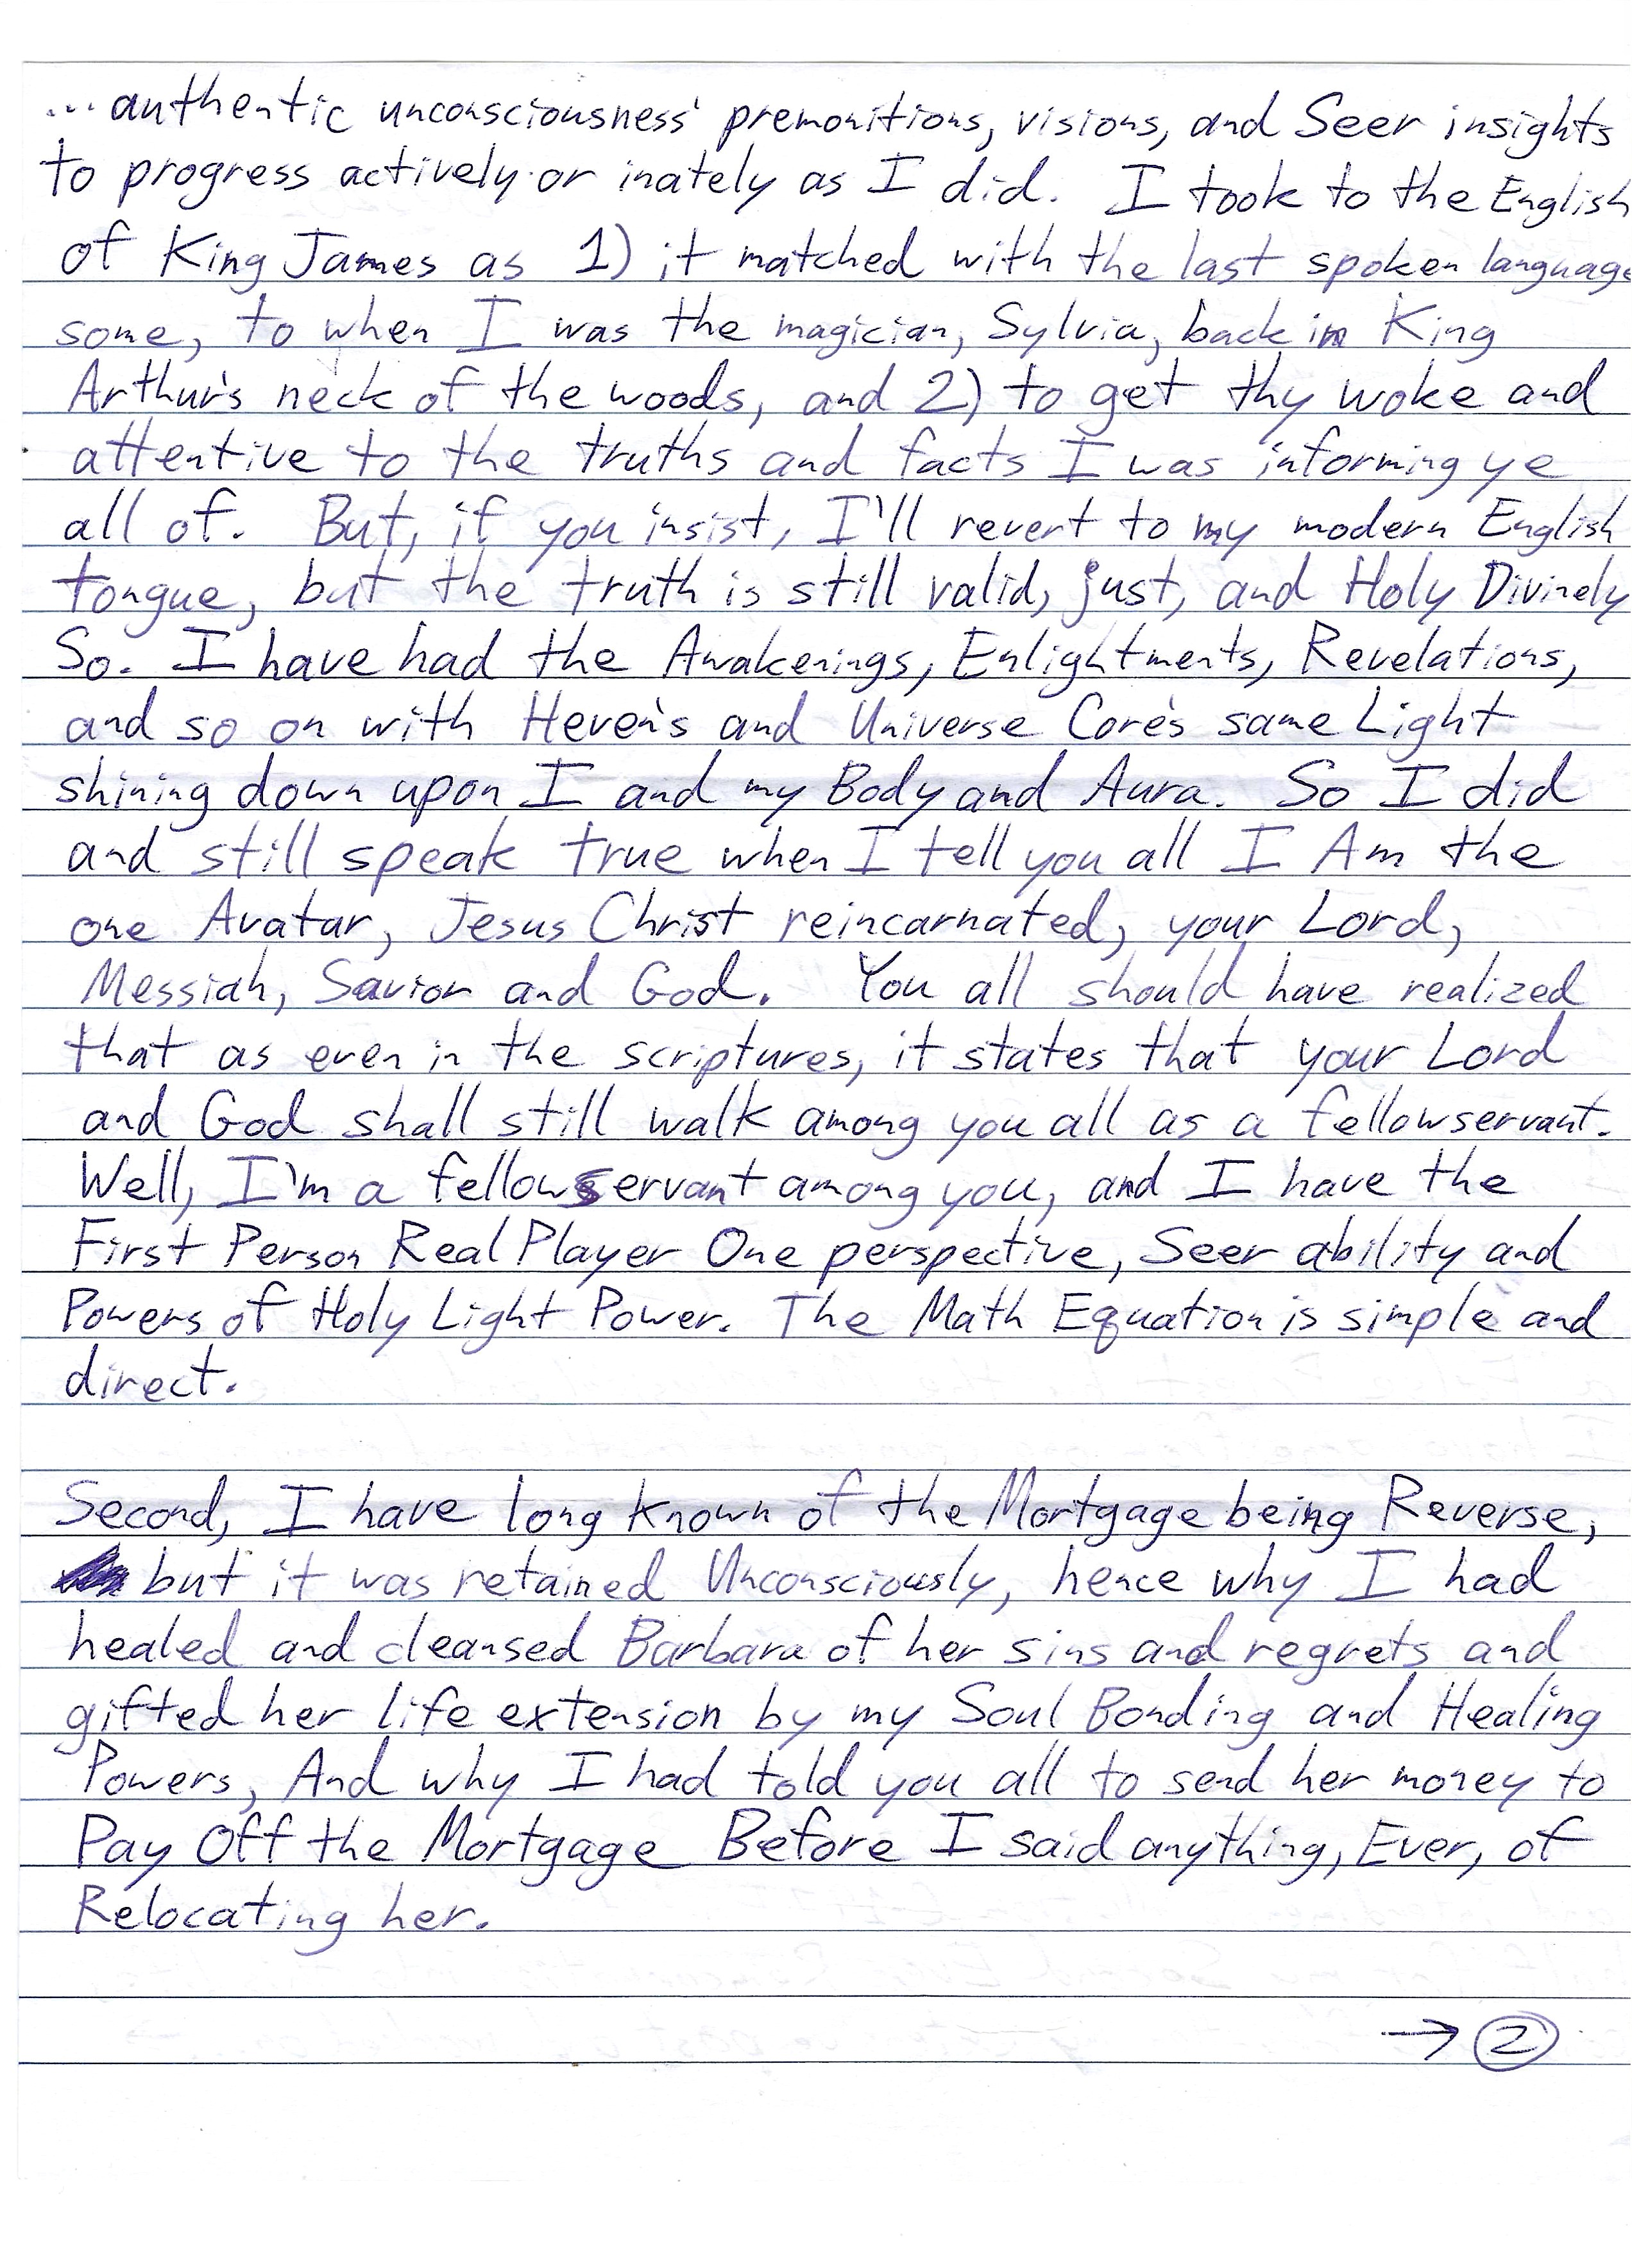 August 12 Letter Page 2.jpg